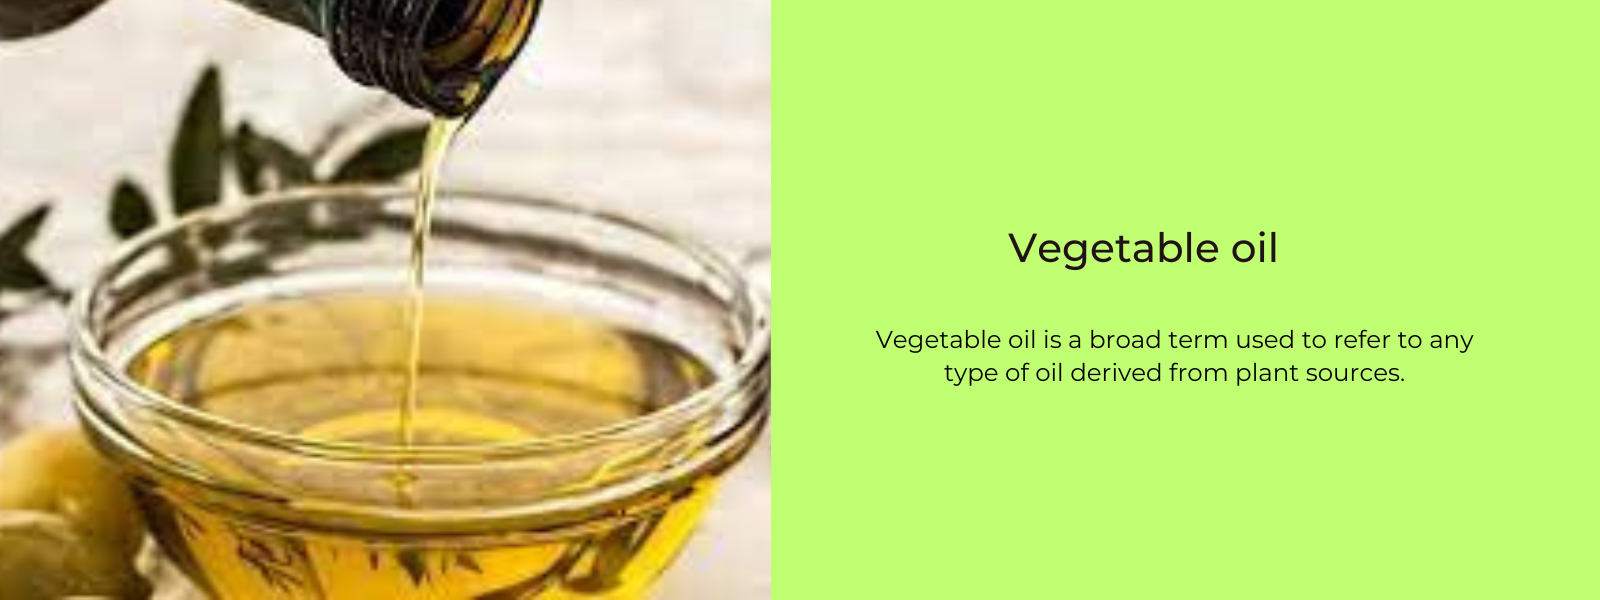 Vegetable oil - Health Benefits, Uses and Important Facts